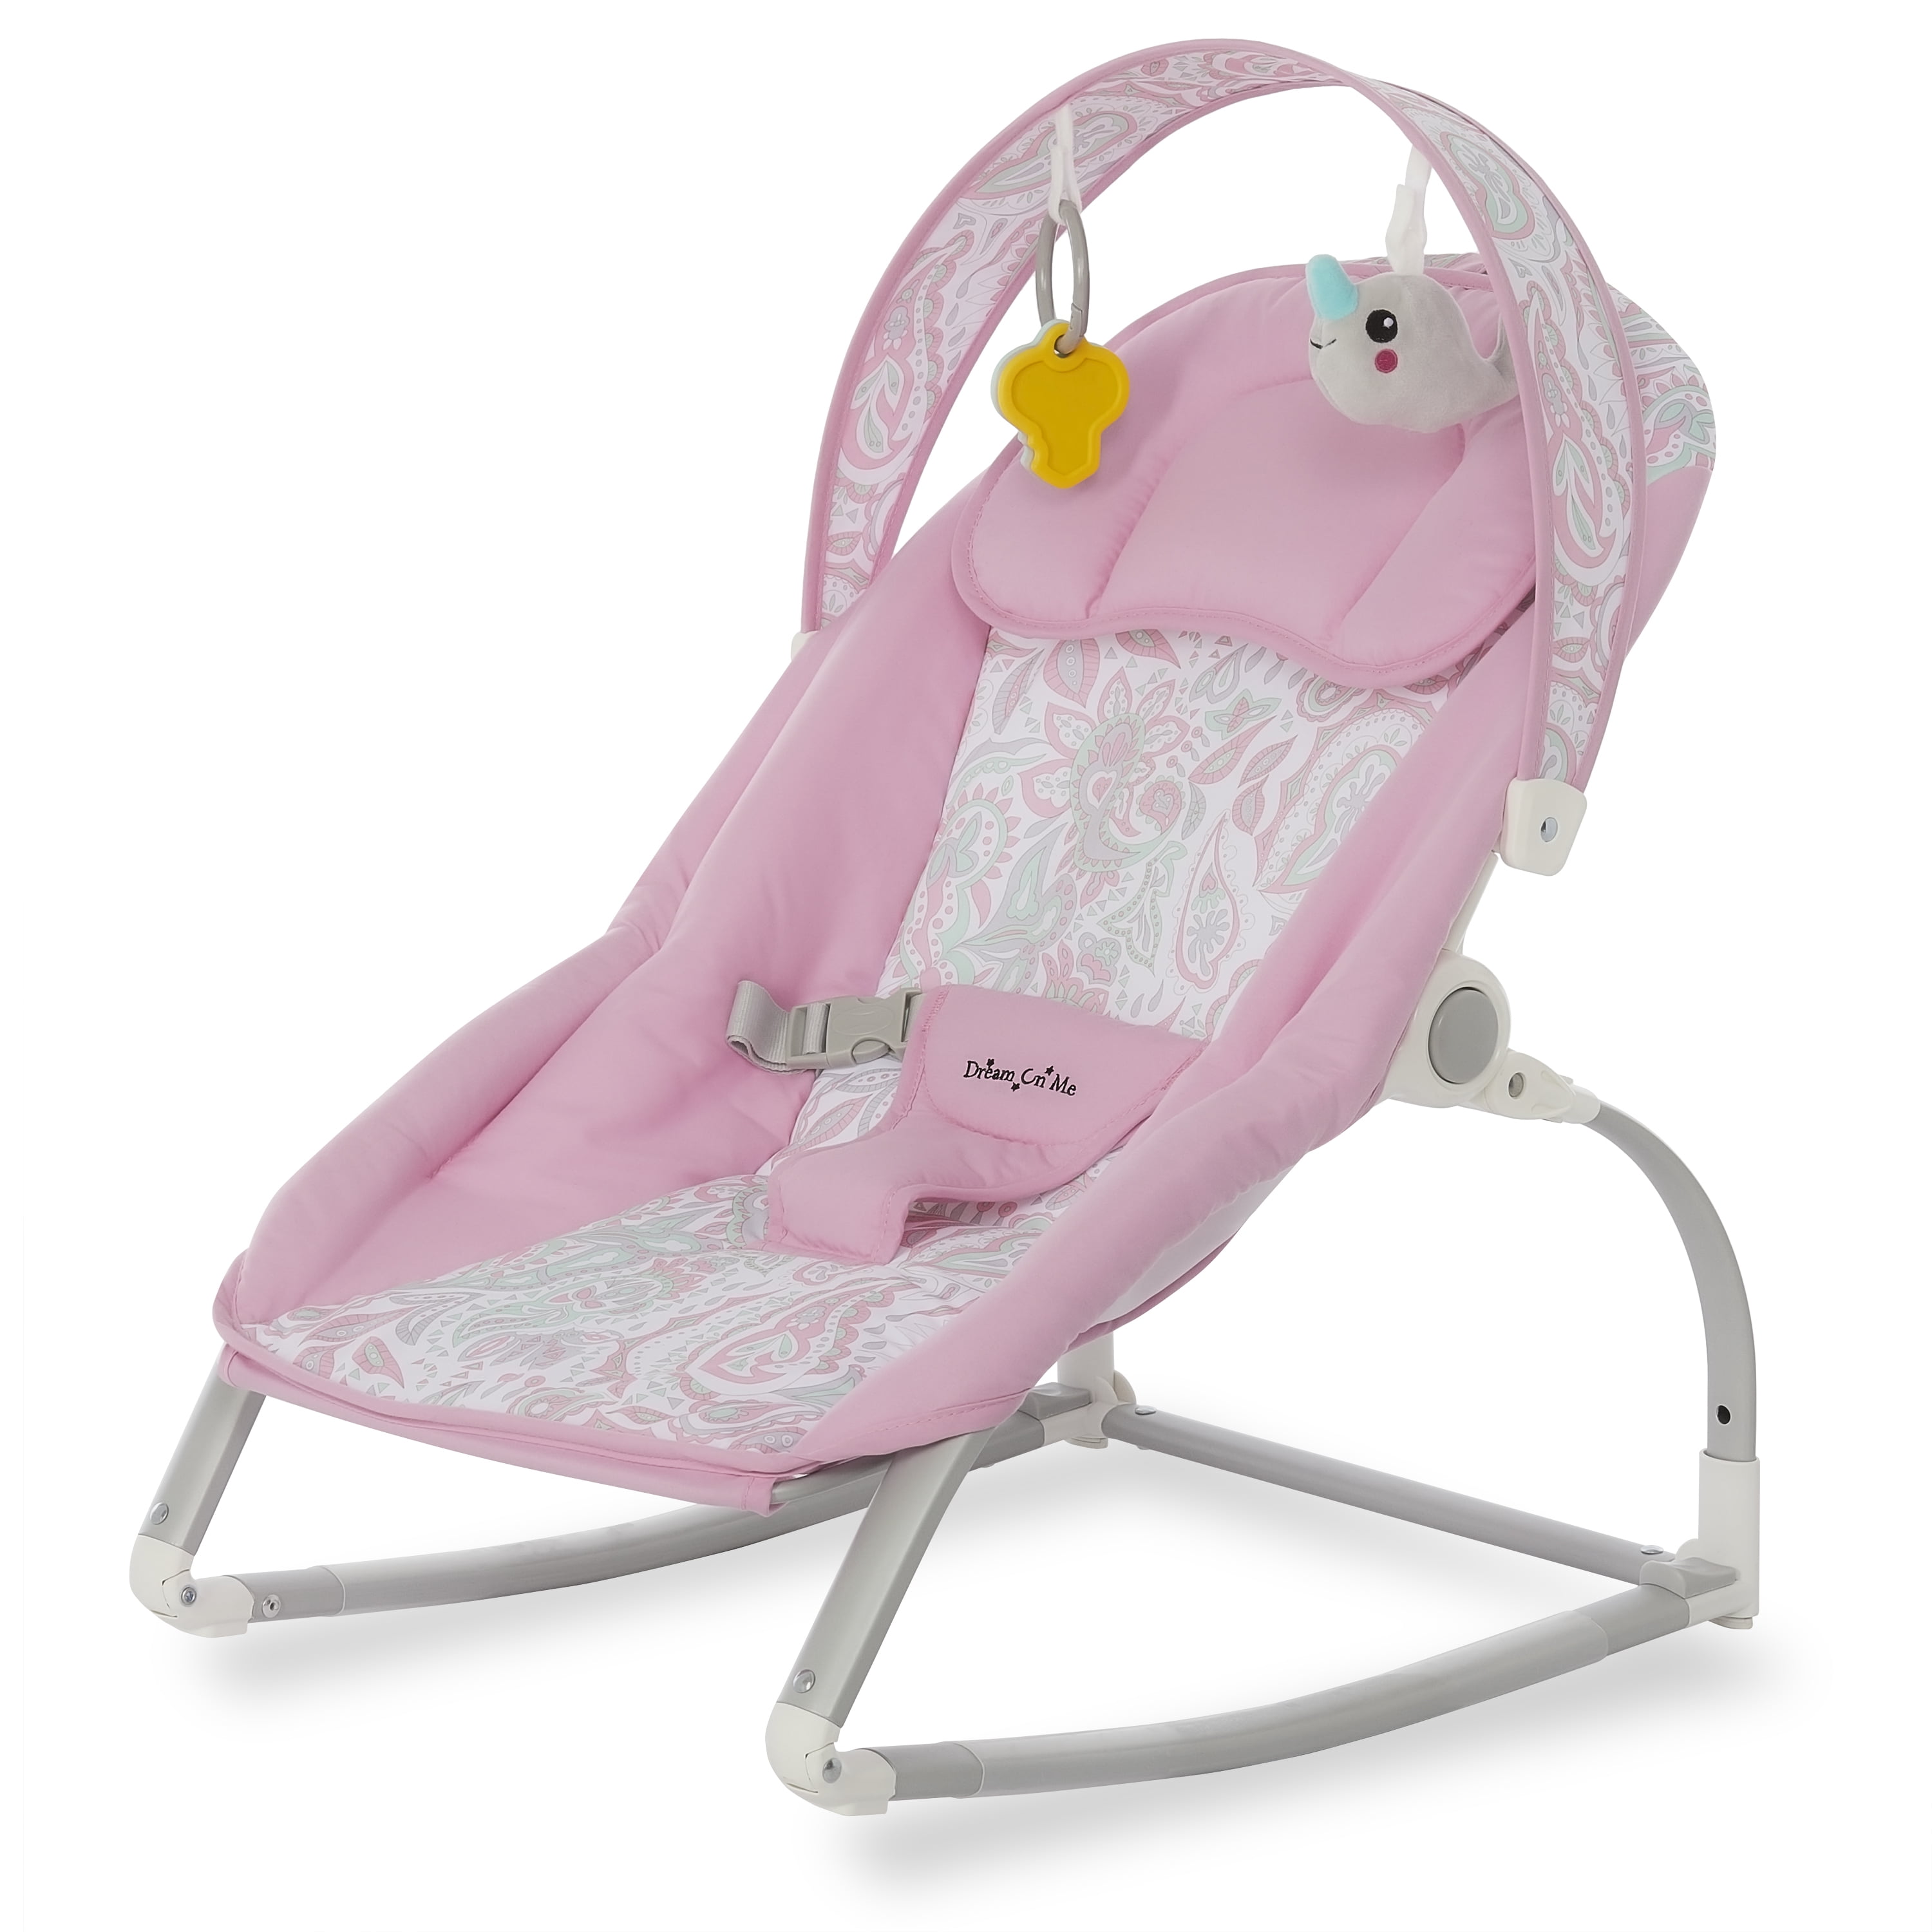 Baby Toddler Kids Girl Rocker Bouncer Toys Vibration Soothing Chair Pink New 